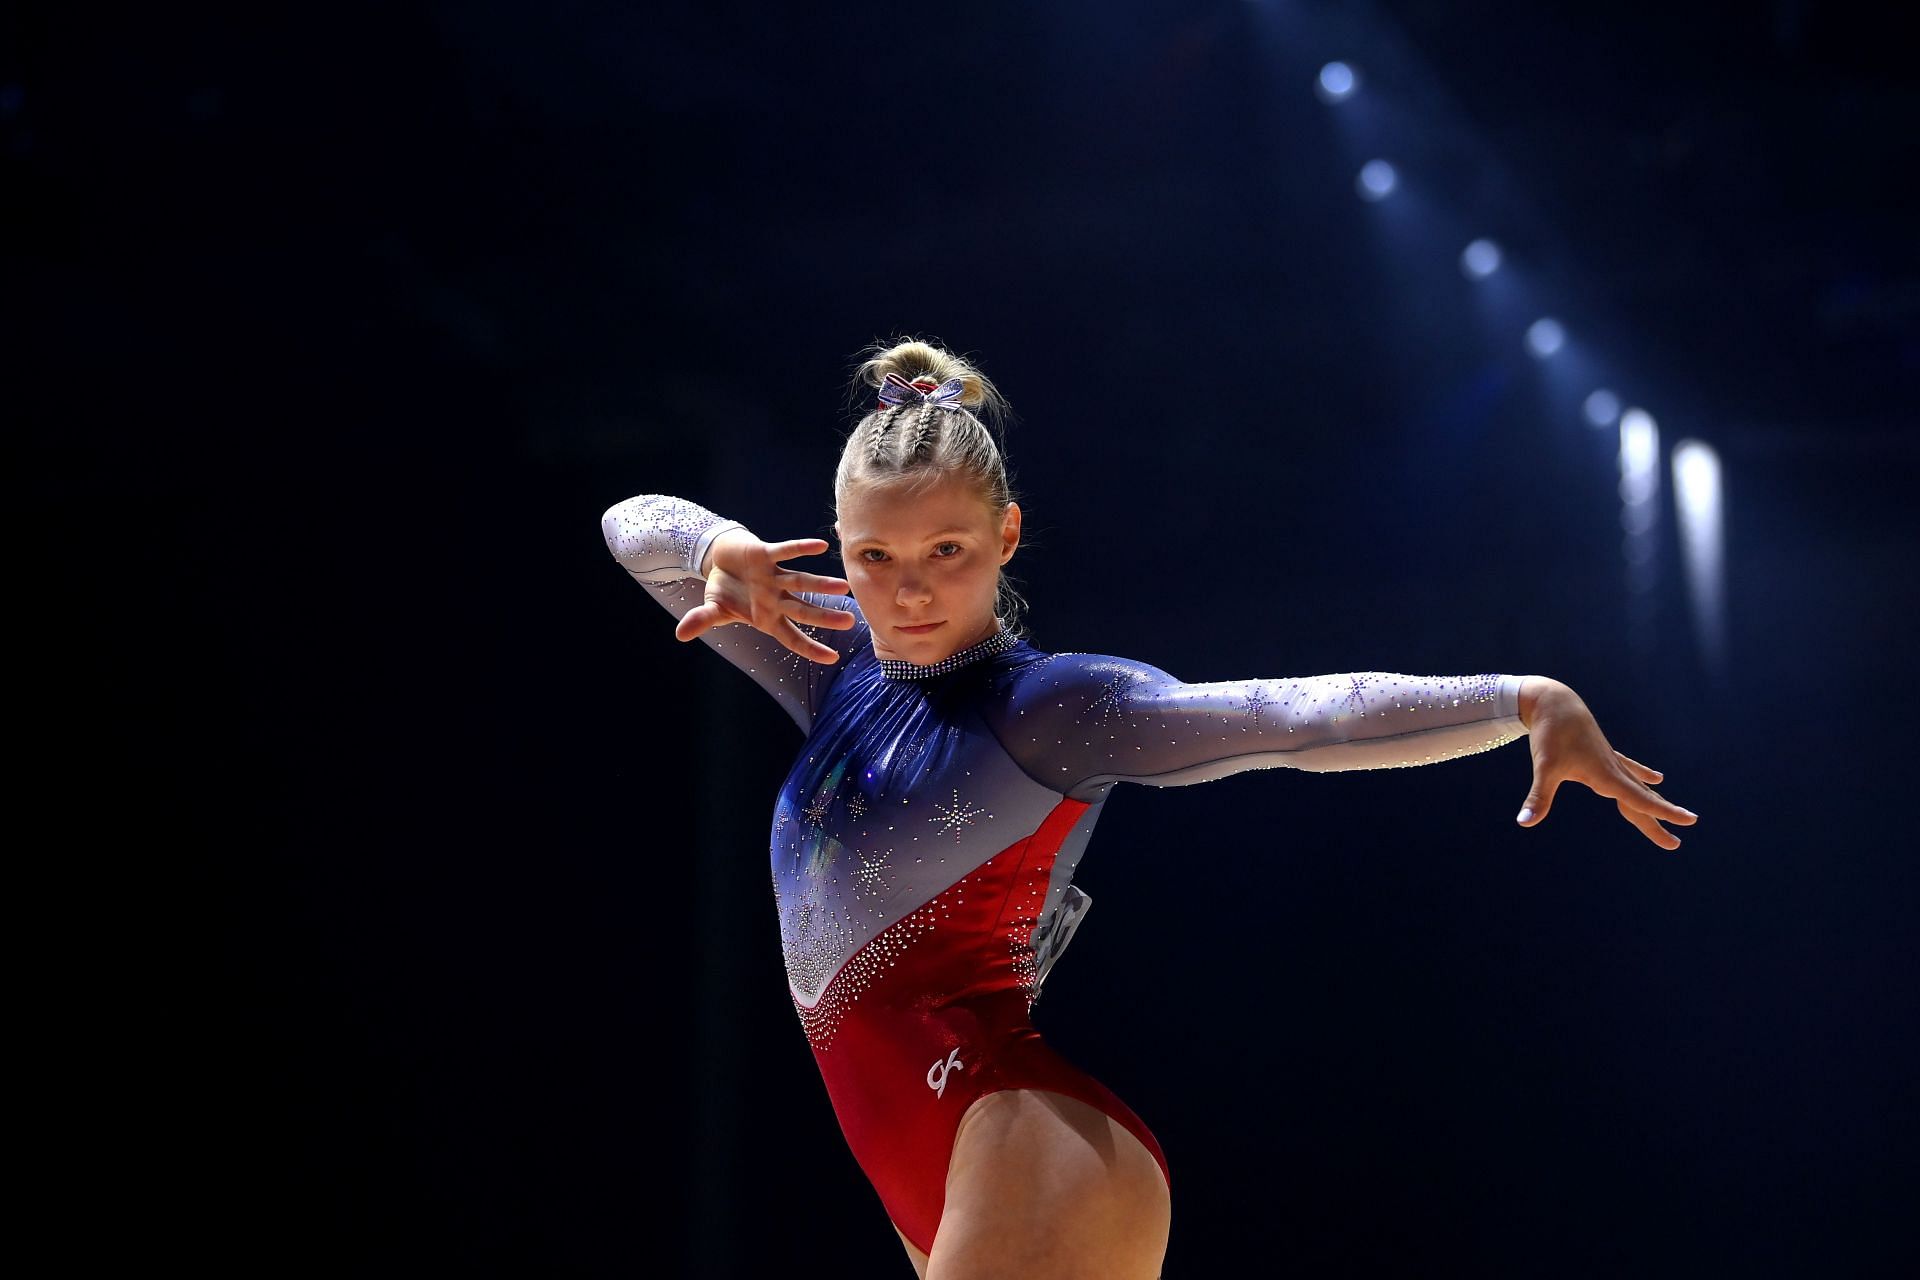 Jade Carey at the FIG Artistic Gymnastics World Championships (Photo by Laurence Griffiths/Getty Images)